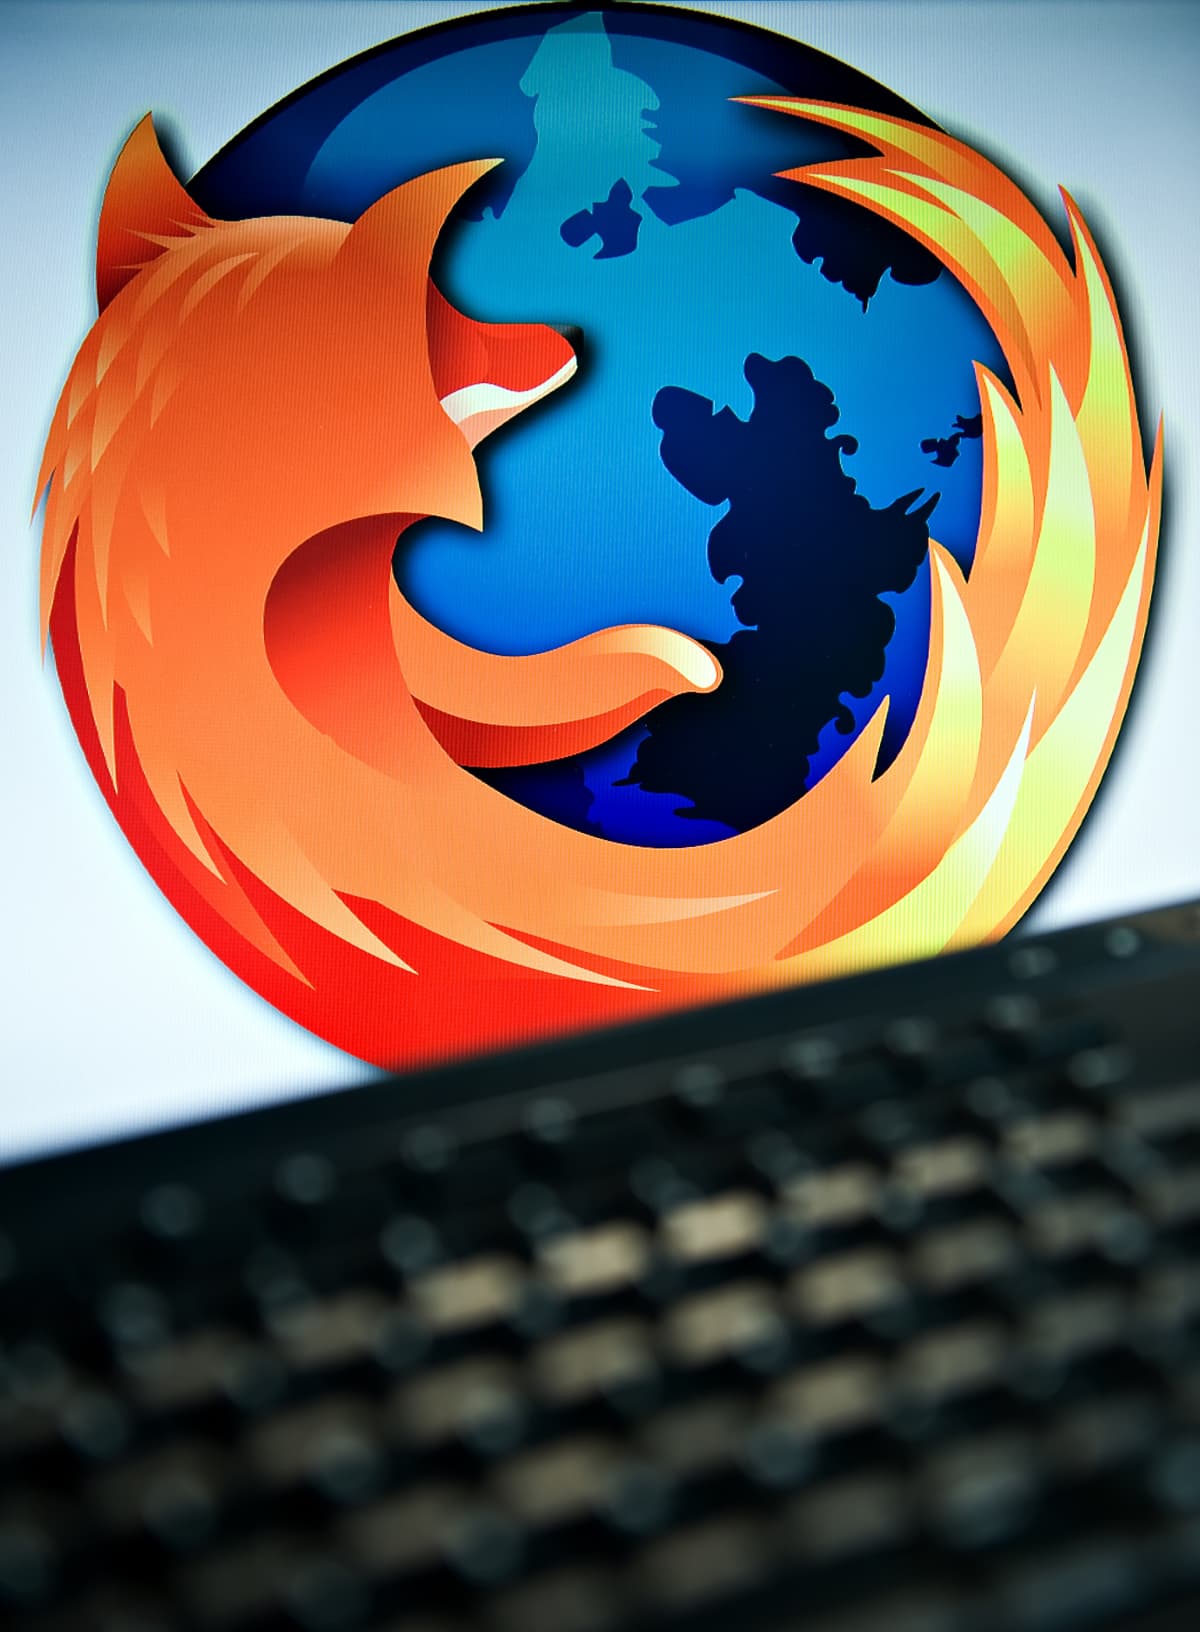 A screen displays the logo of the open-source web browser Firefox on July 31, 2009, in London, as the software edges towards it's billionth download within the next twenty four hours. First released in 2004, the browser currently holds around 31 % of the market share with Microsoft's Internet Explorer dominating the field with 60 %. AFP PHOTO/Leon Neal (Photo credit should read LEON NEAL/AFP via Getty Images)